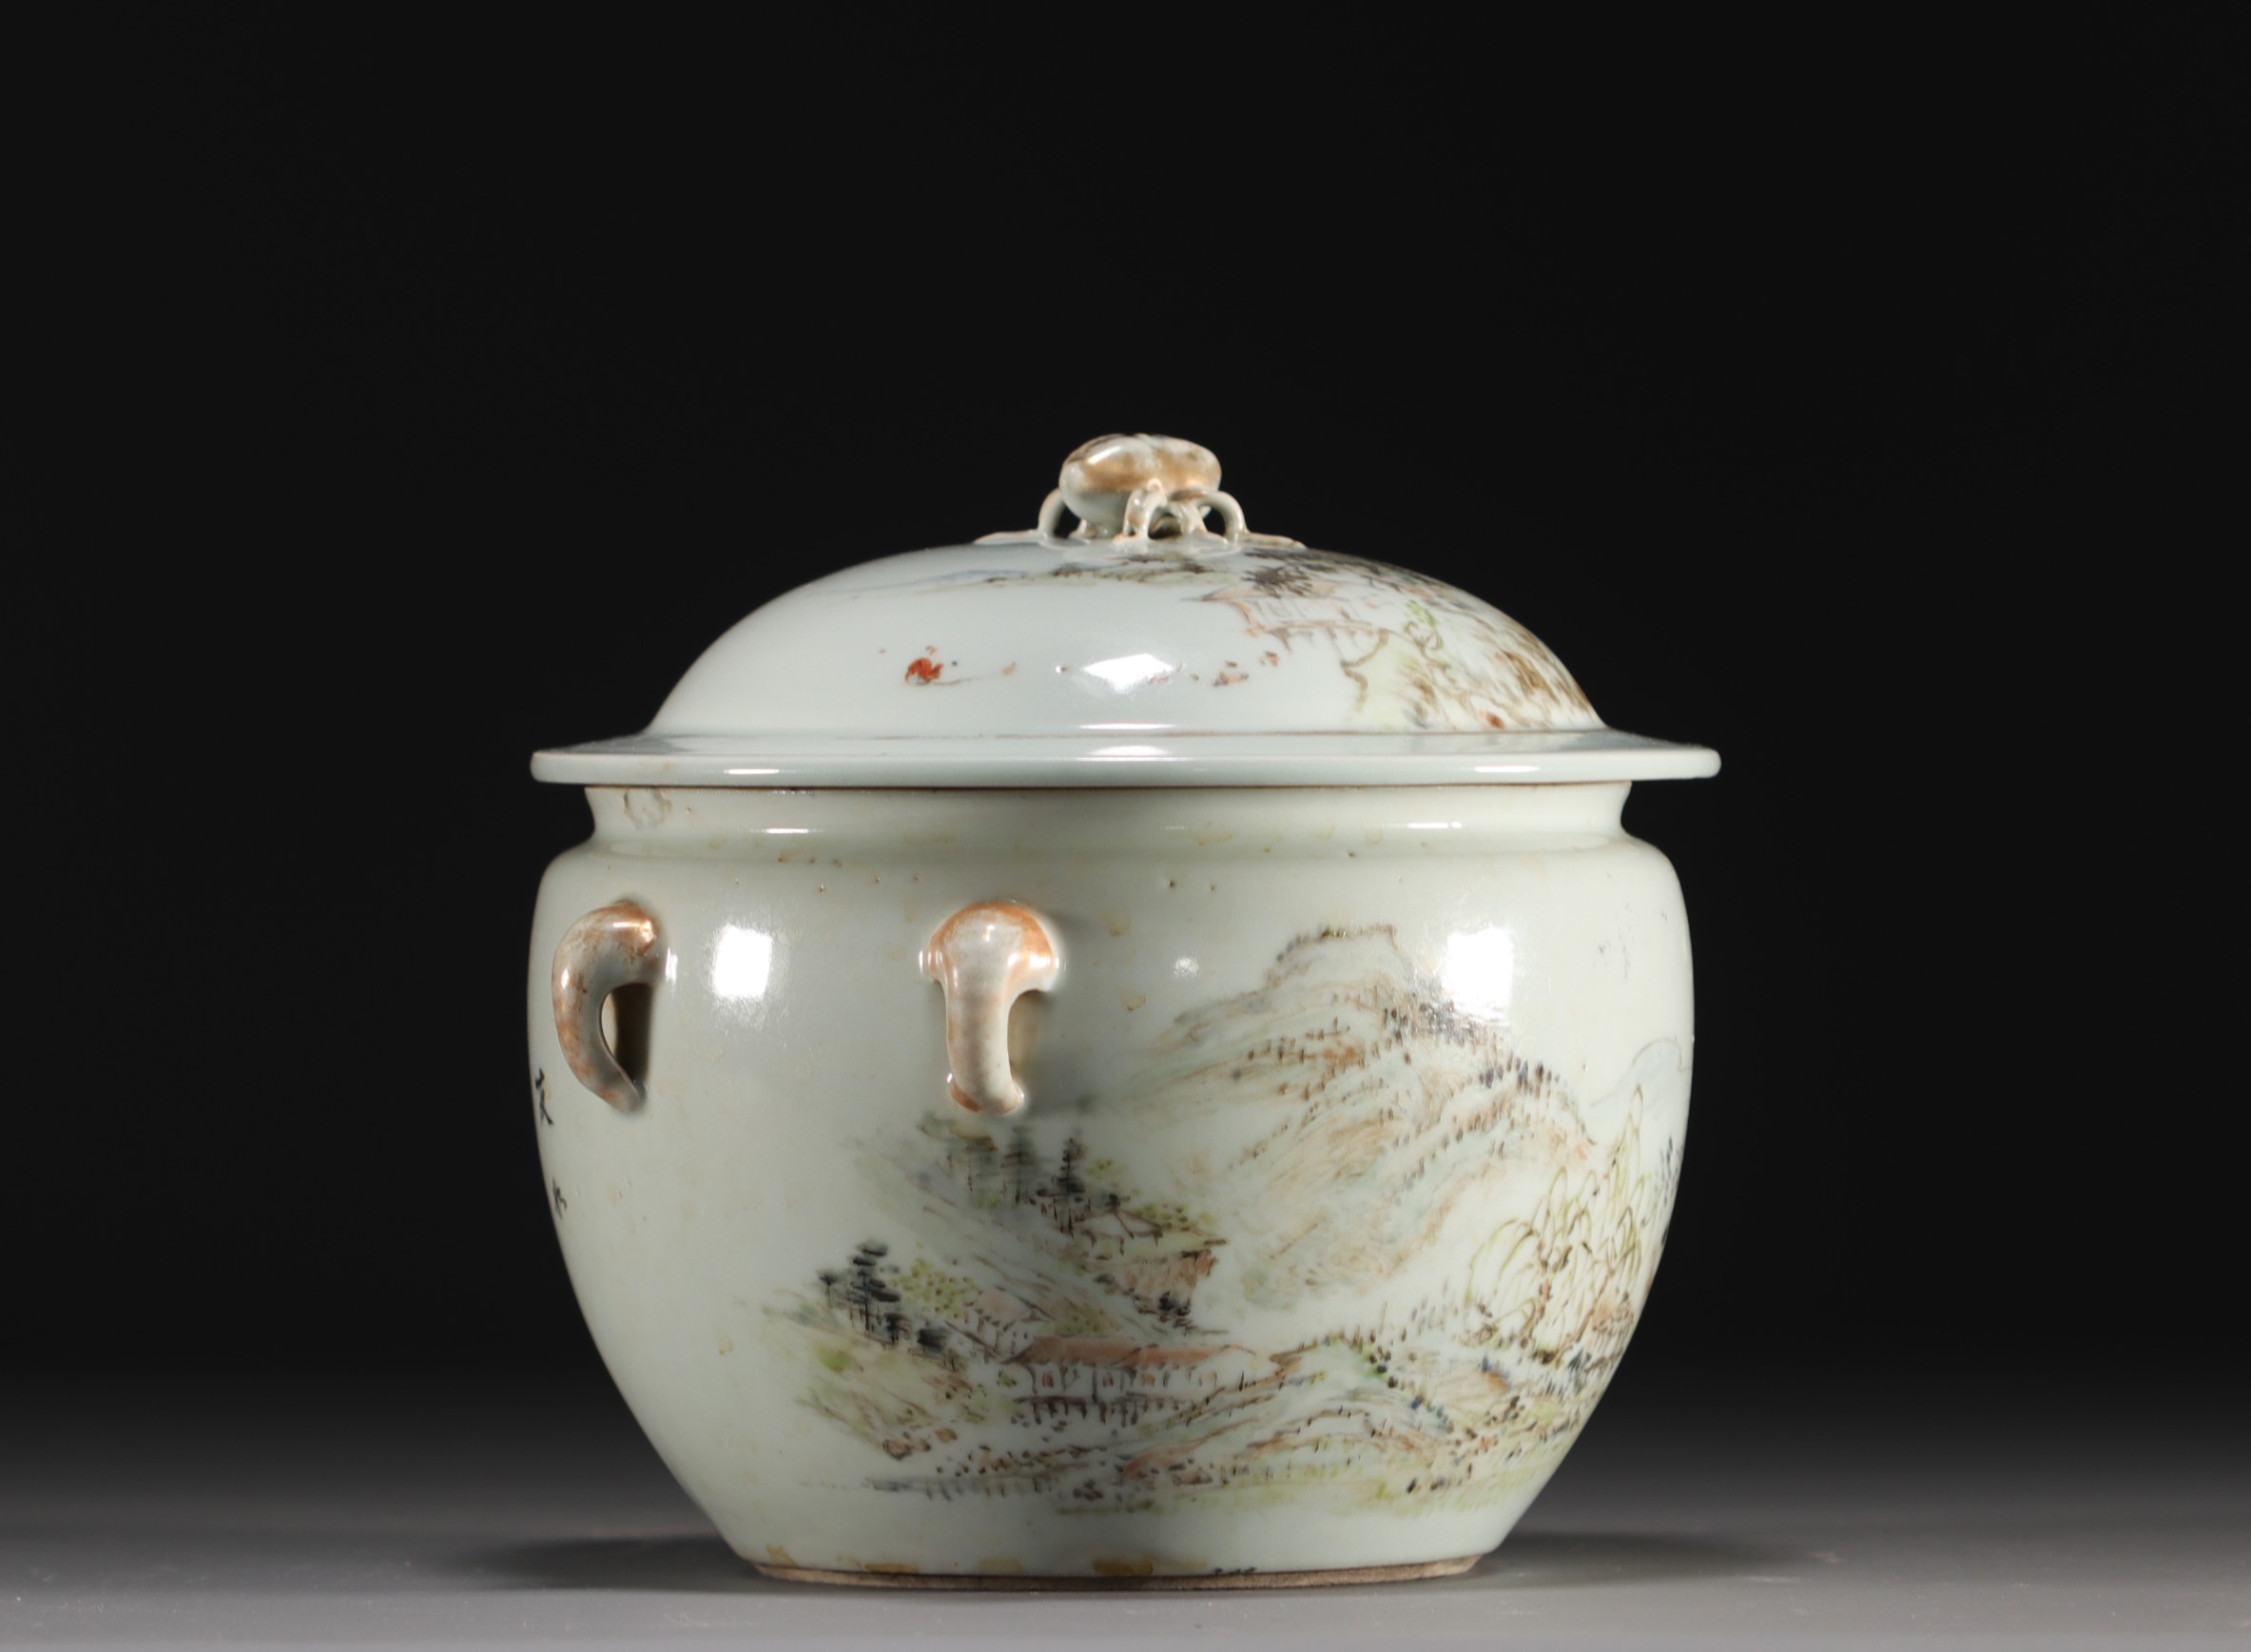 China - Tureen made of porcelain decorated with landscapes, 19th century. - Image 3 of 5